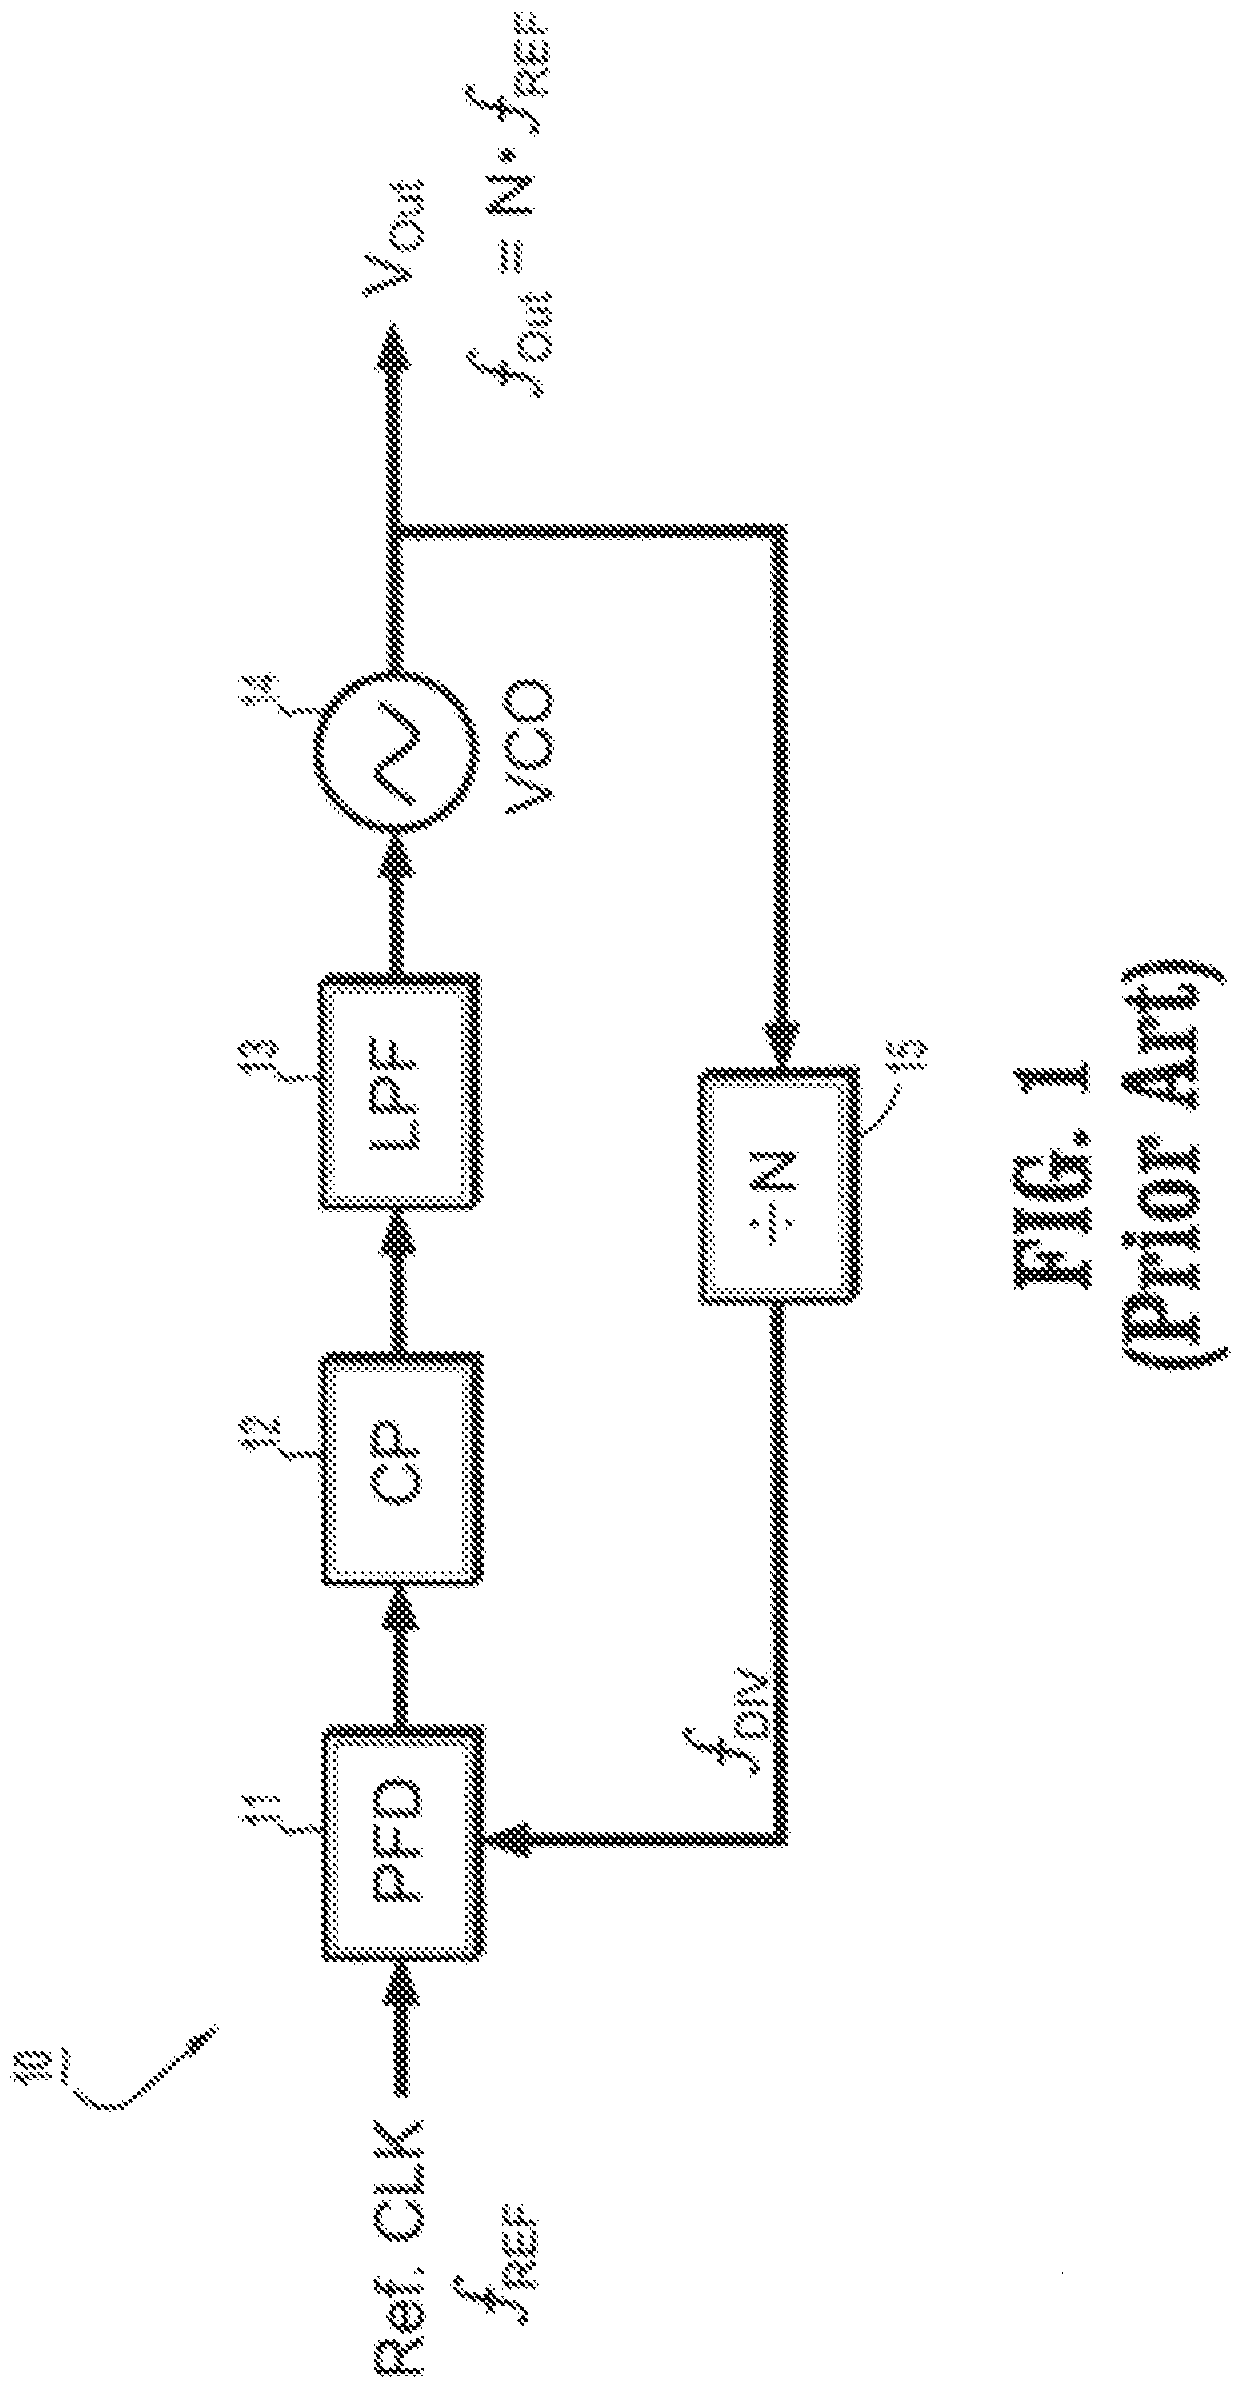 Circuits and methods for implementing sub-integer-N frequency dividers using phase rotators